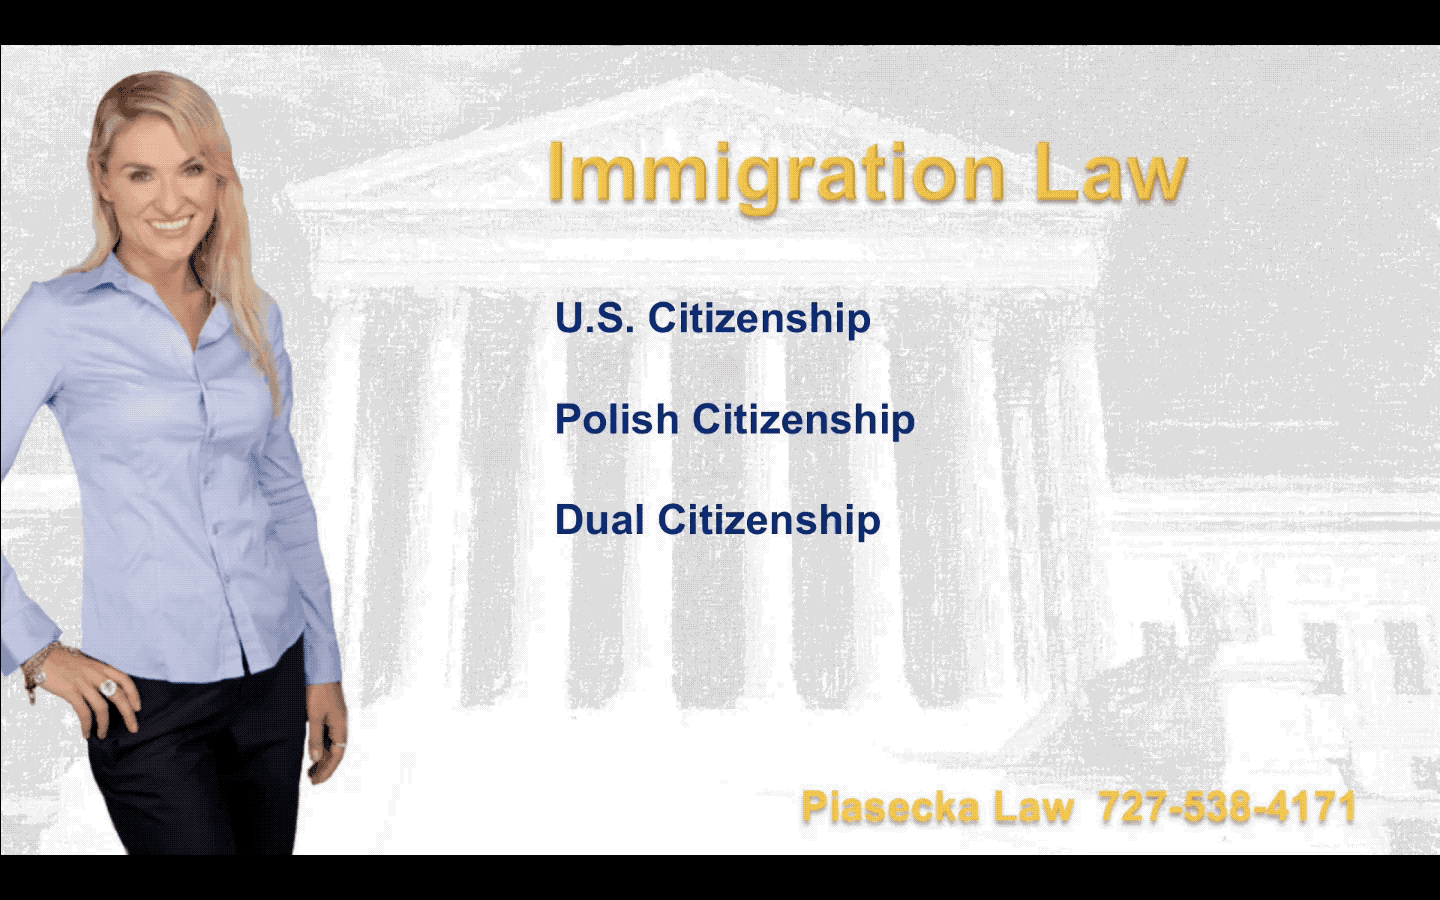 Piasecka Law 727-538-4171 Immigration Law